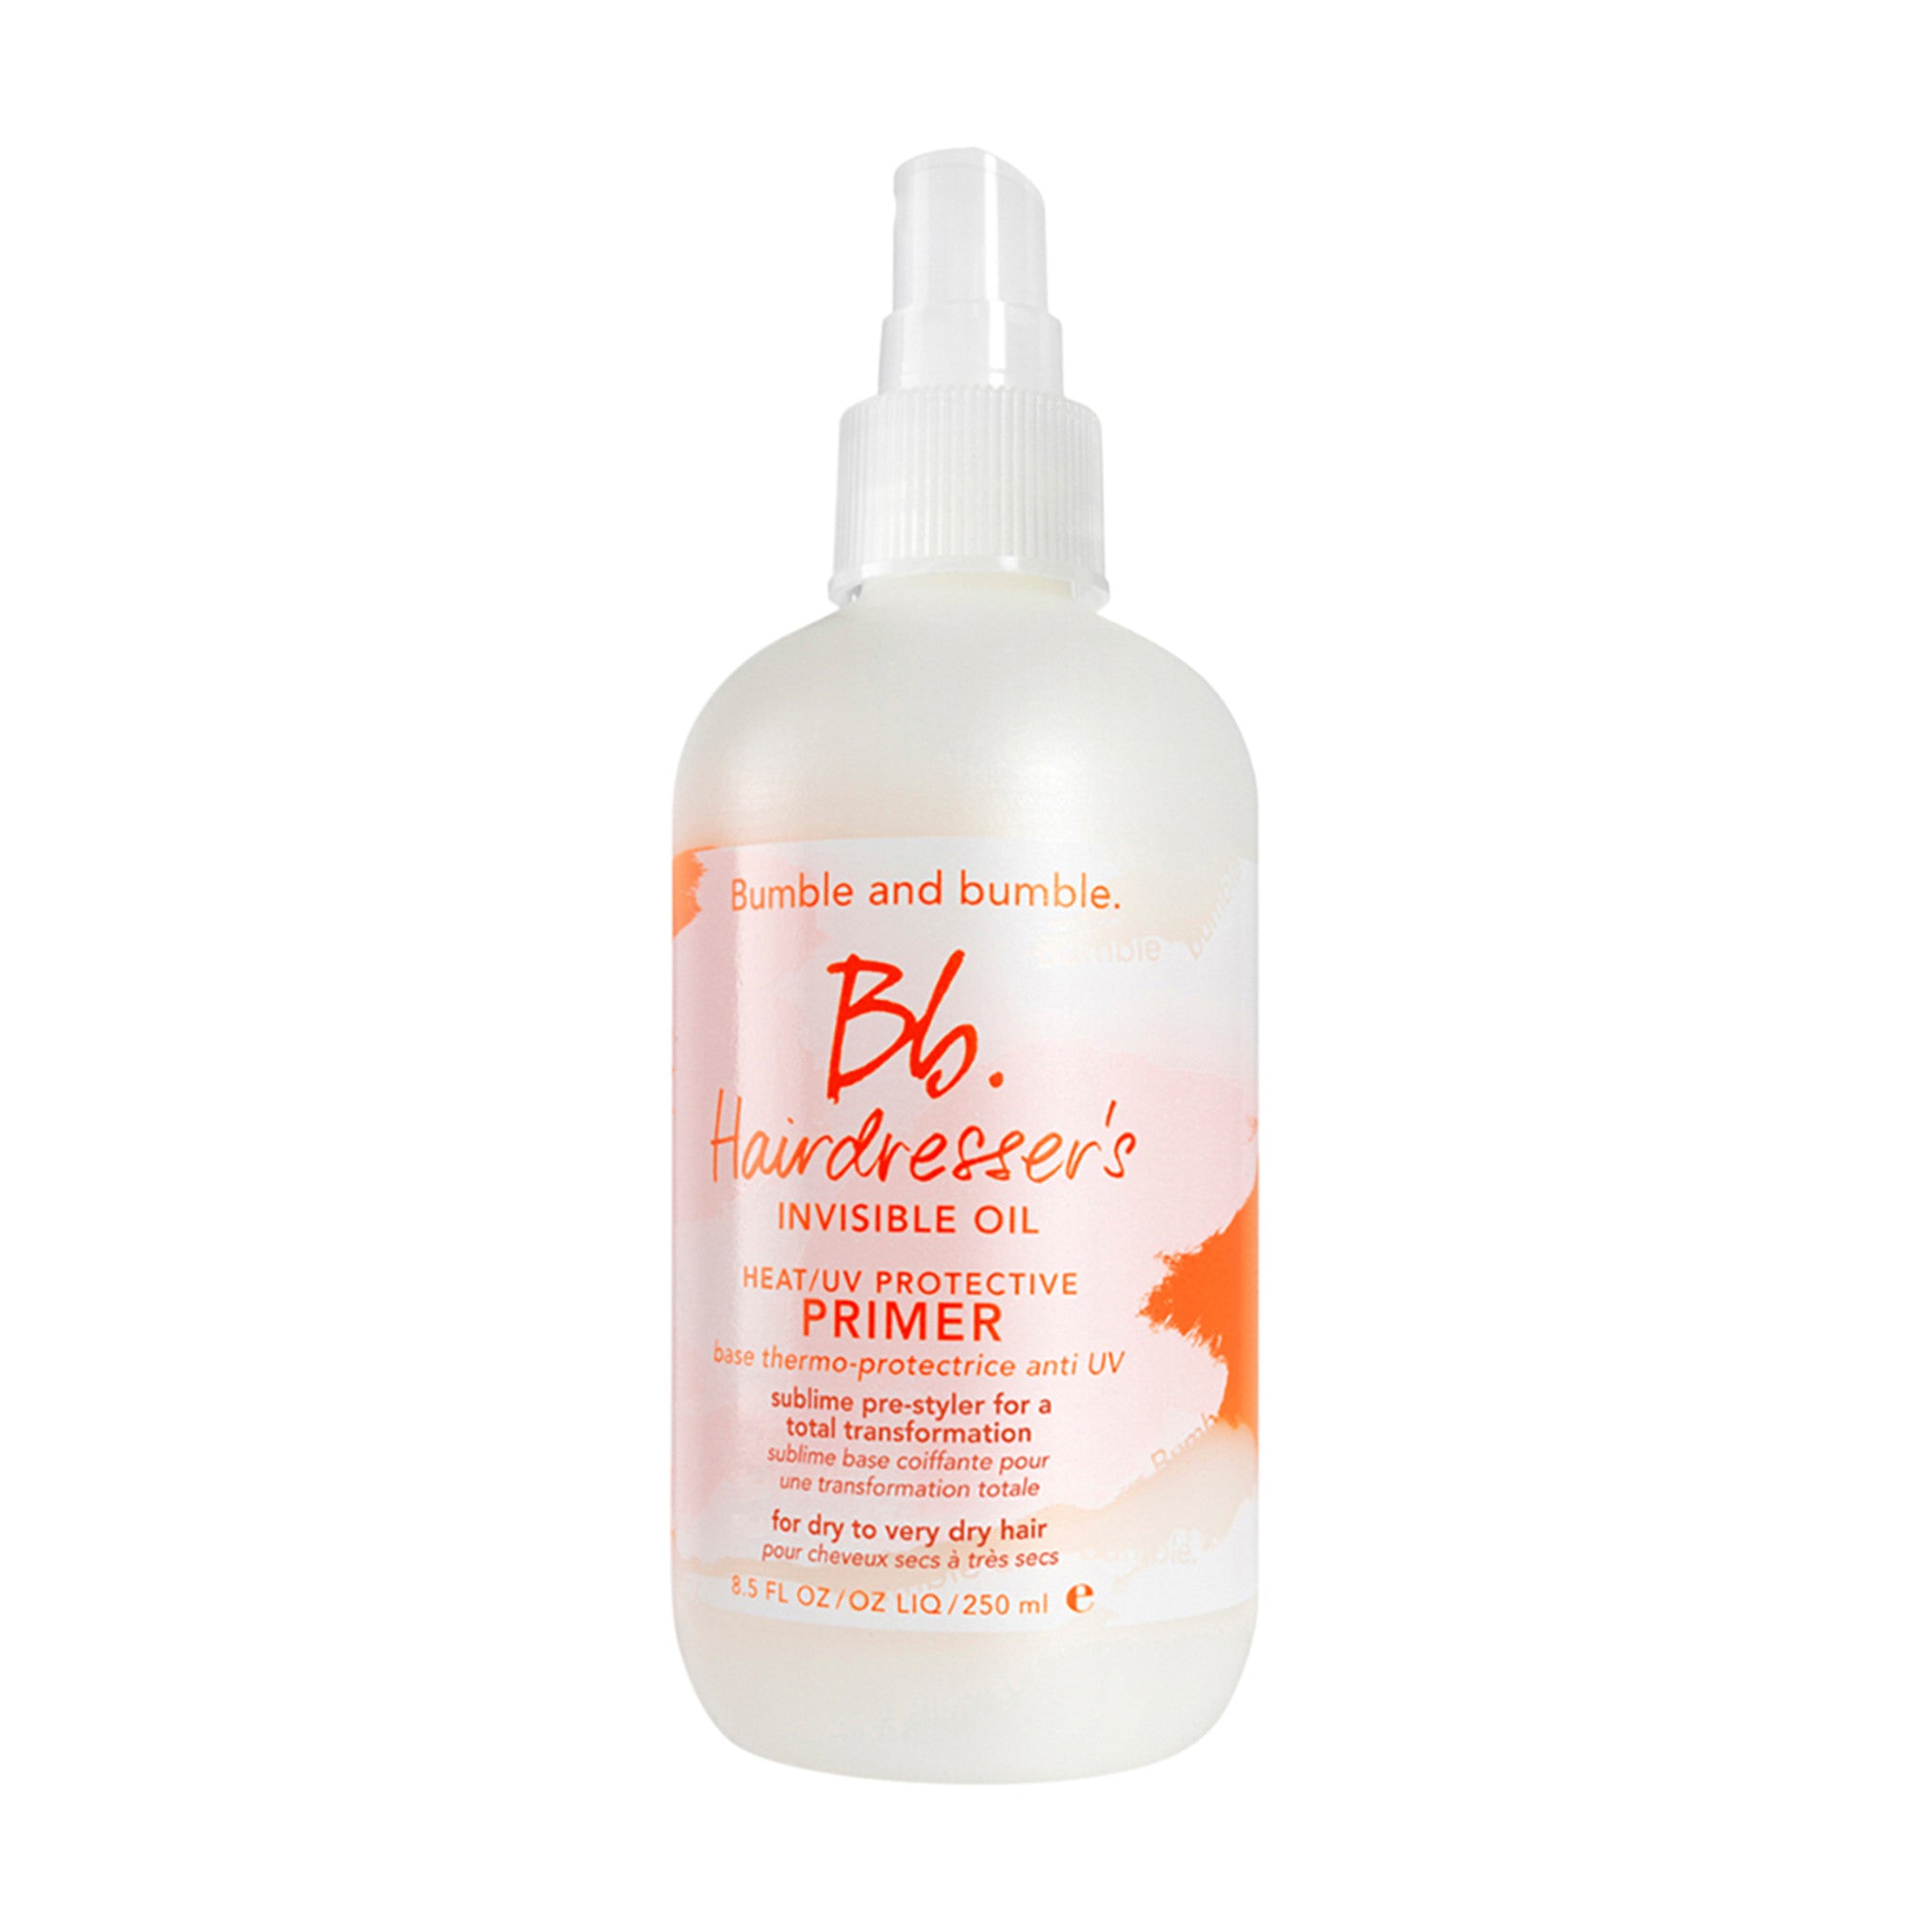 Bumble and Bumble Hairdresser's Invisible Oil Heat/UV Protective Primer Size variant: 8.5 fl oz | 250 ml main image.